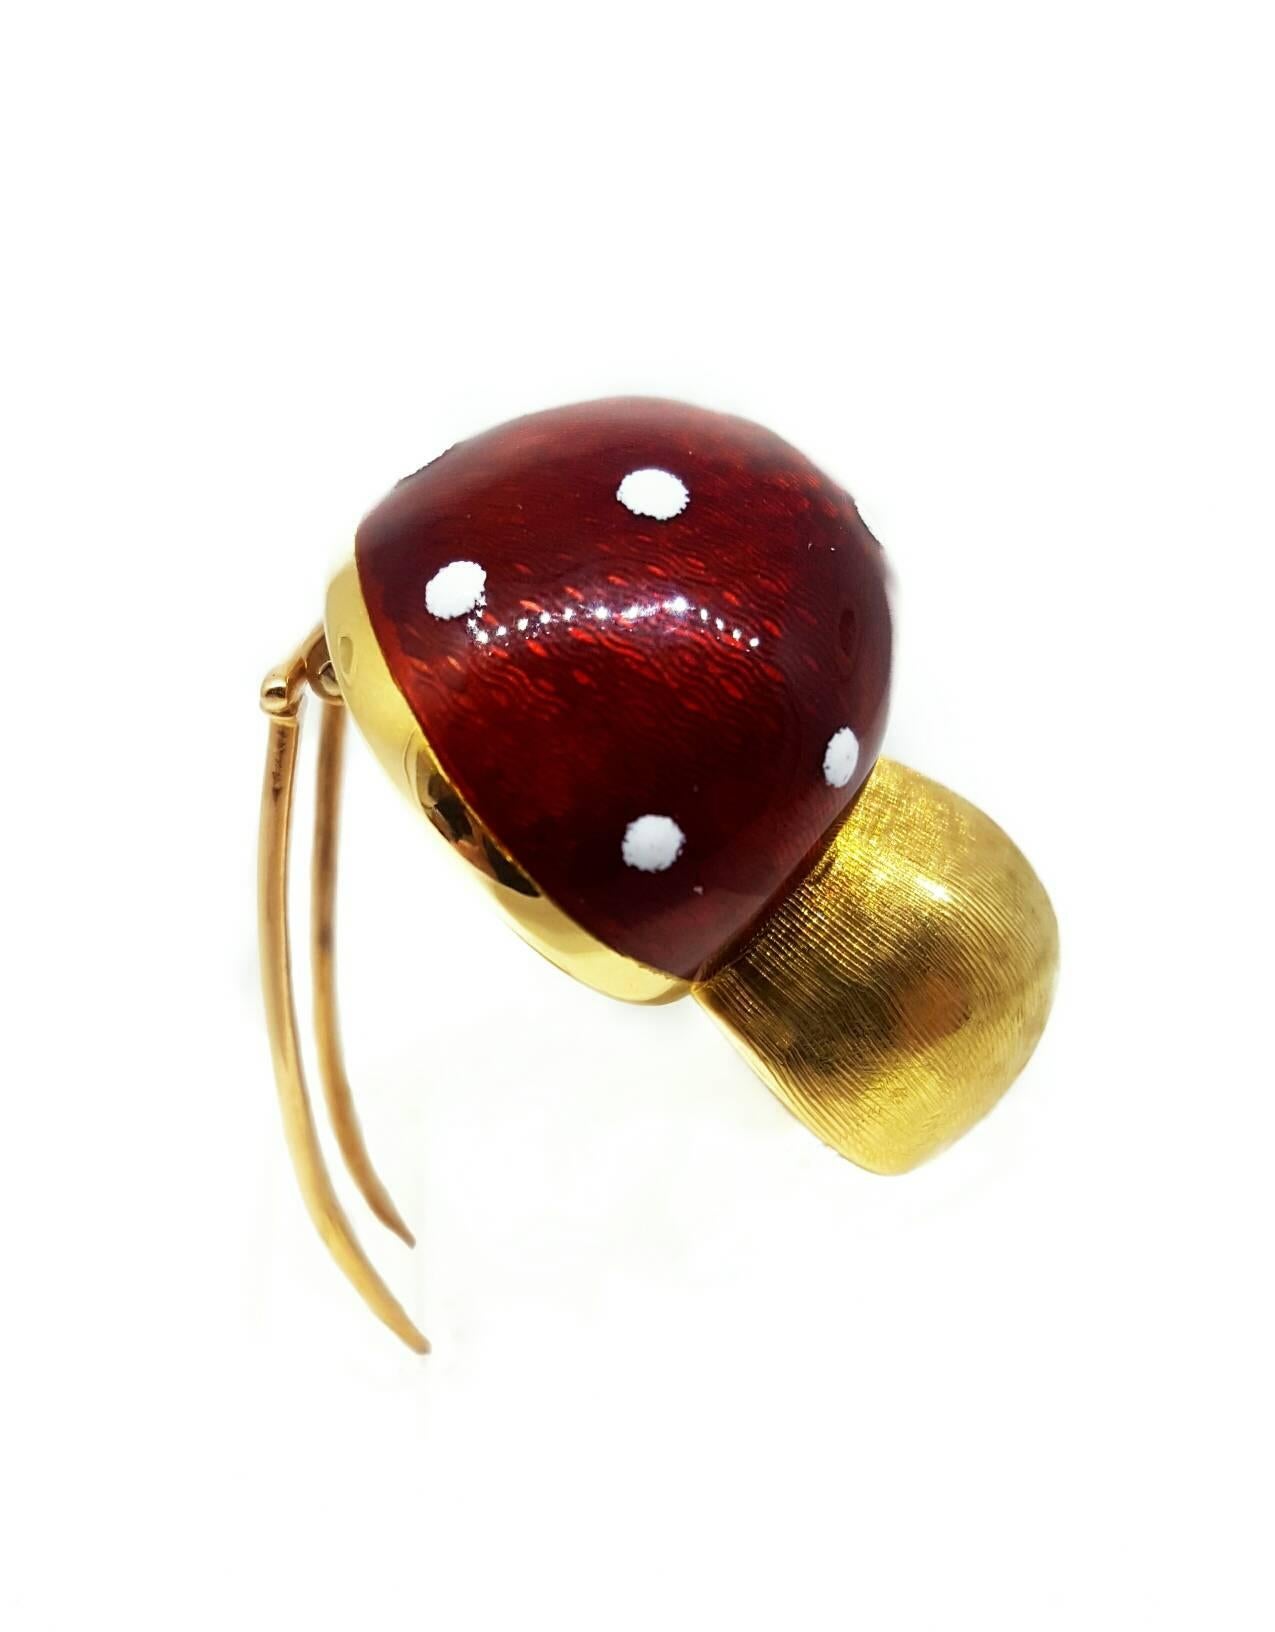 A one-of-a-kind, Italian designed, 18 karat yellow gold and enamel brooch. In an original mushroom design, the brooch is 1 inch in length and 1 inch wide. This design features two pins to fashion the brooch in place. This piece weighs 16.9g